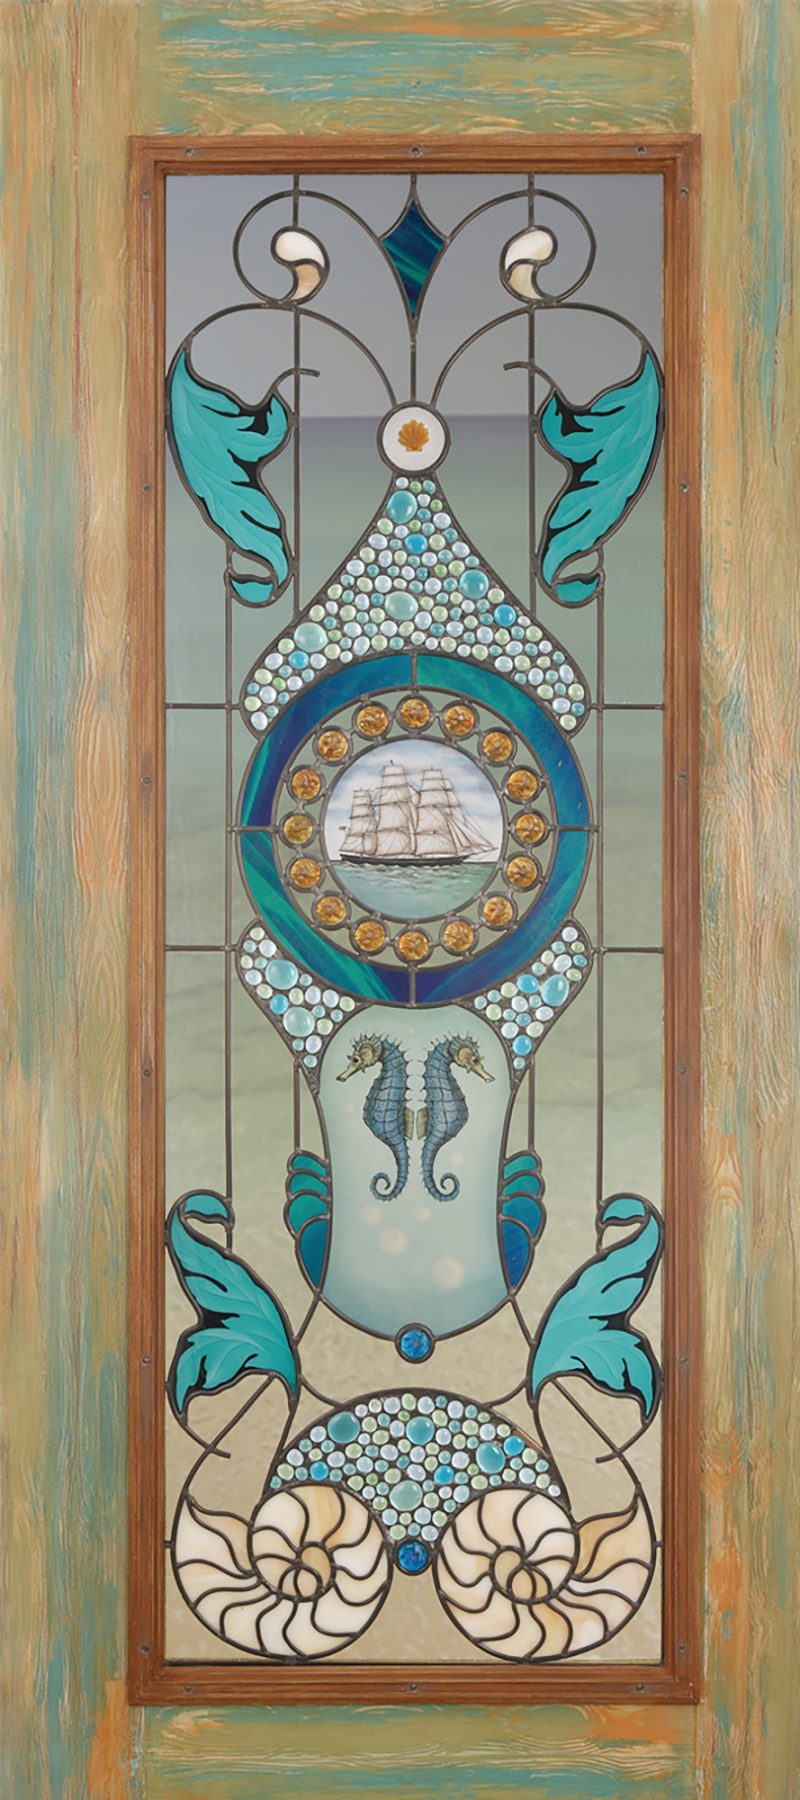 Small contemporary style door with glass painting, rondels, and blues, tans, and clear textured glass.